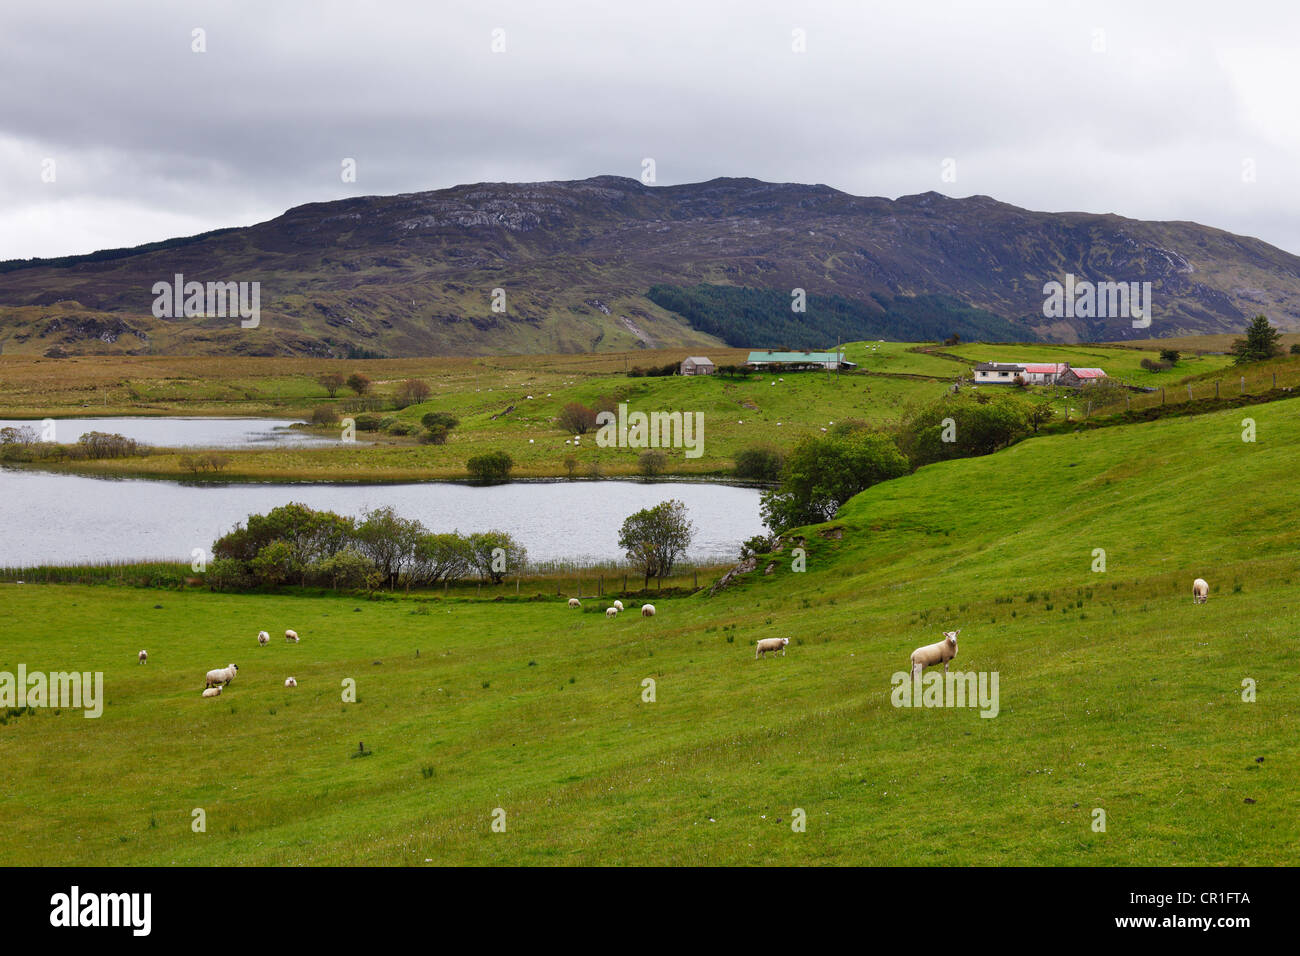 Landscape at Fintown, County Donegal, Ireland, Europe Stock Photo